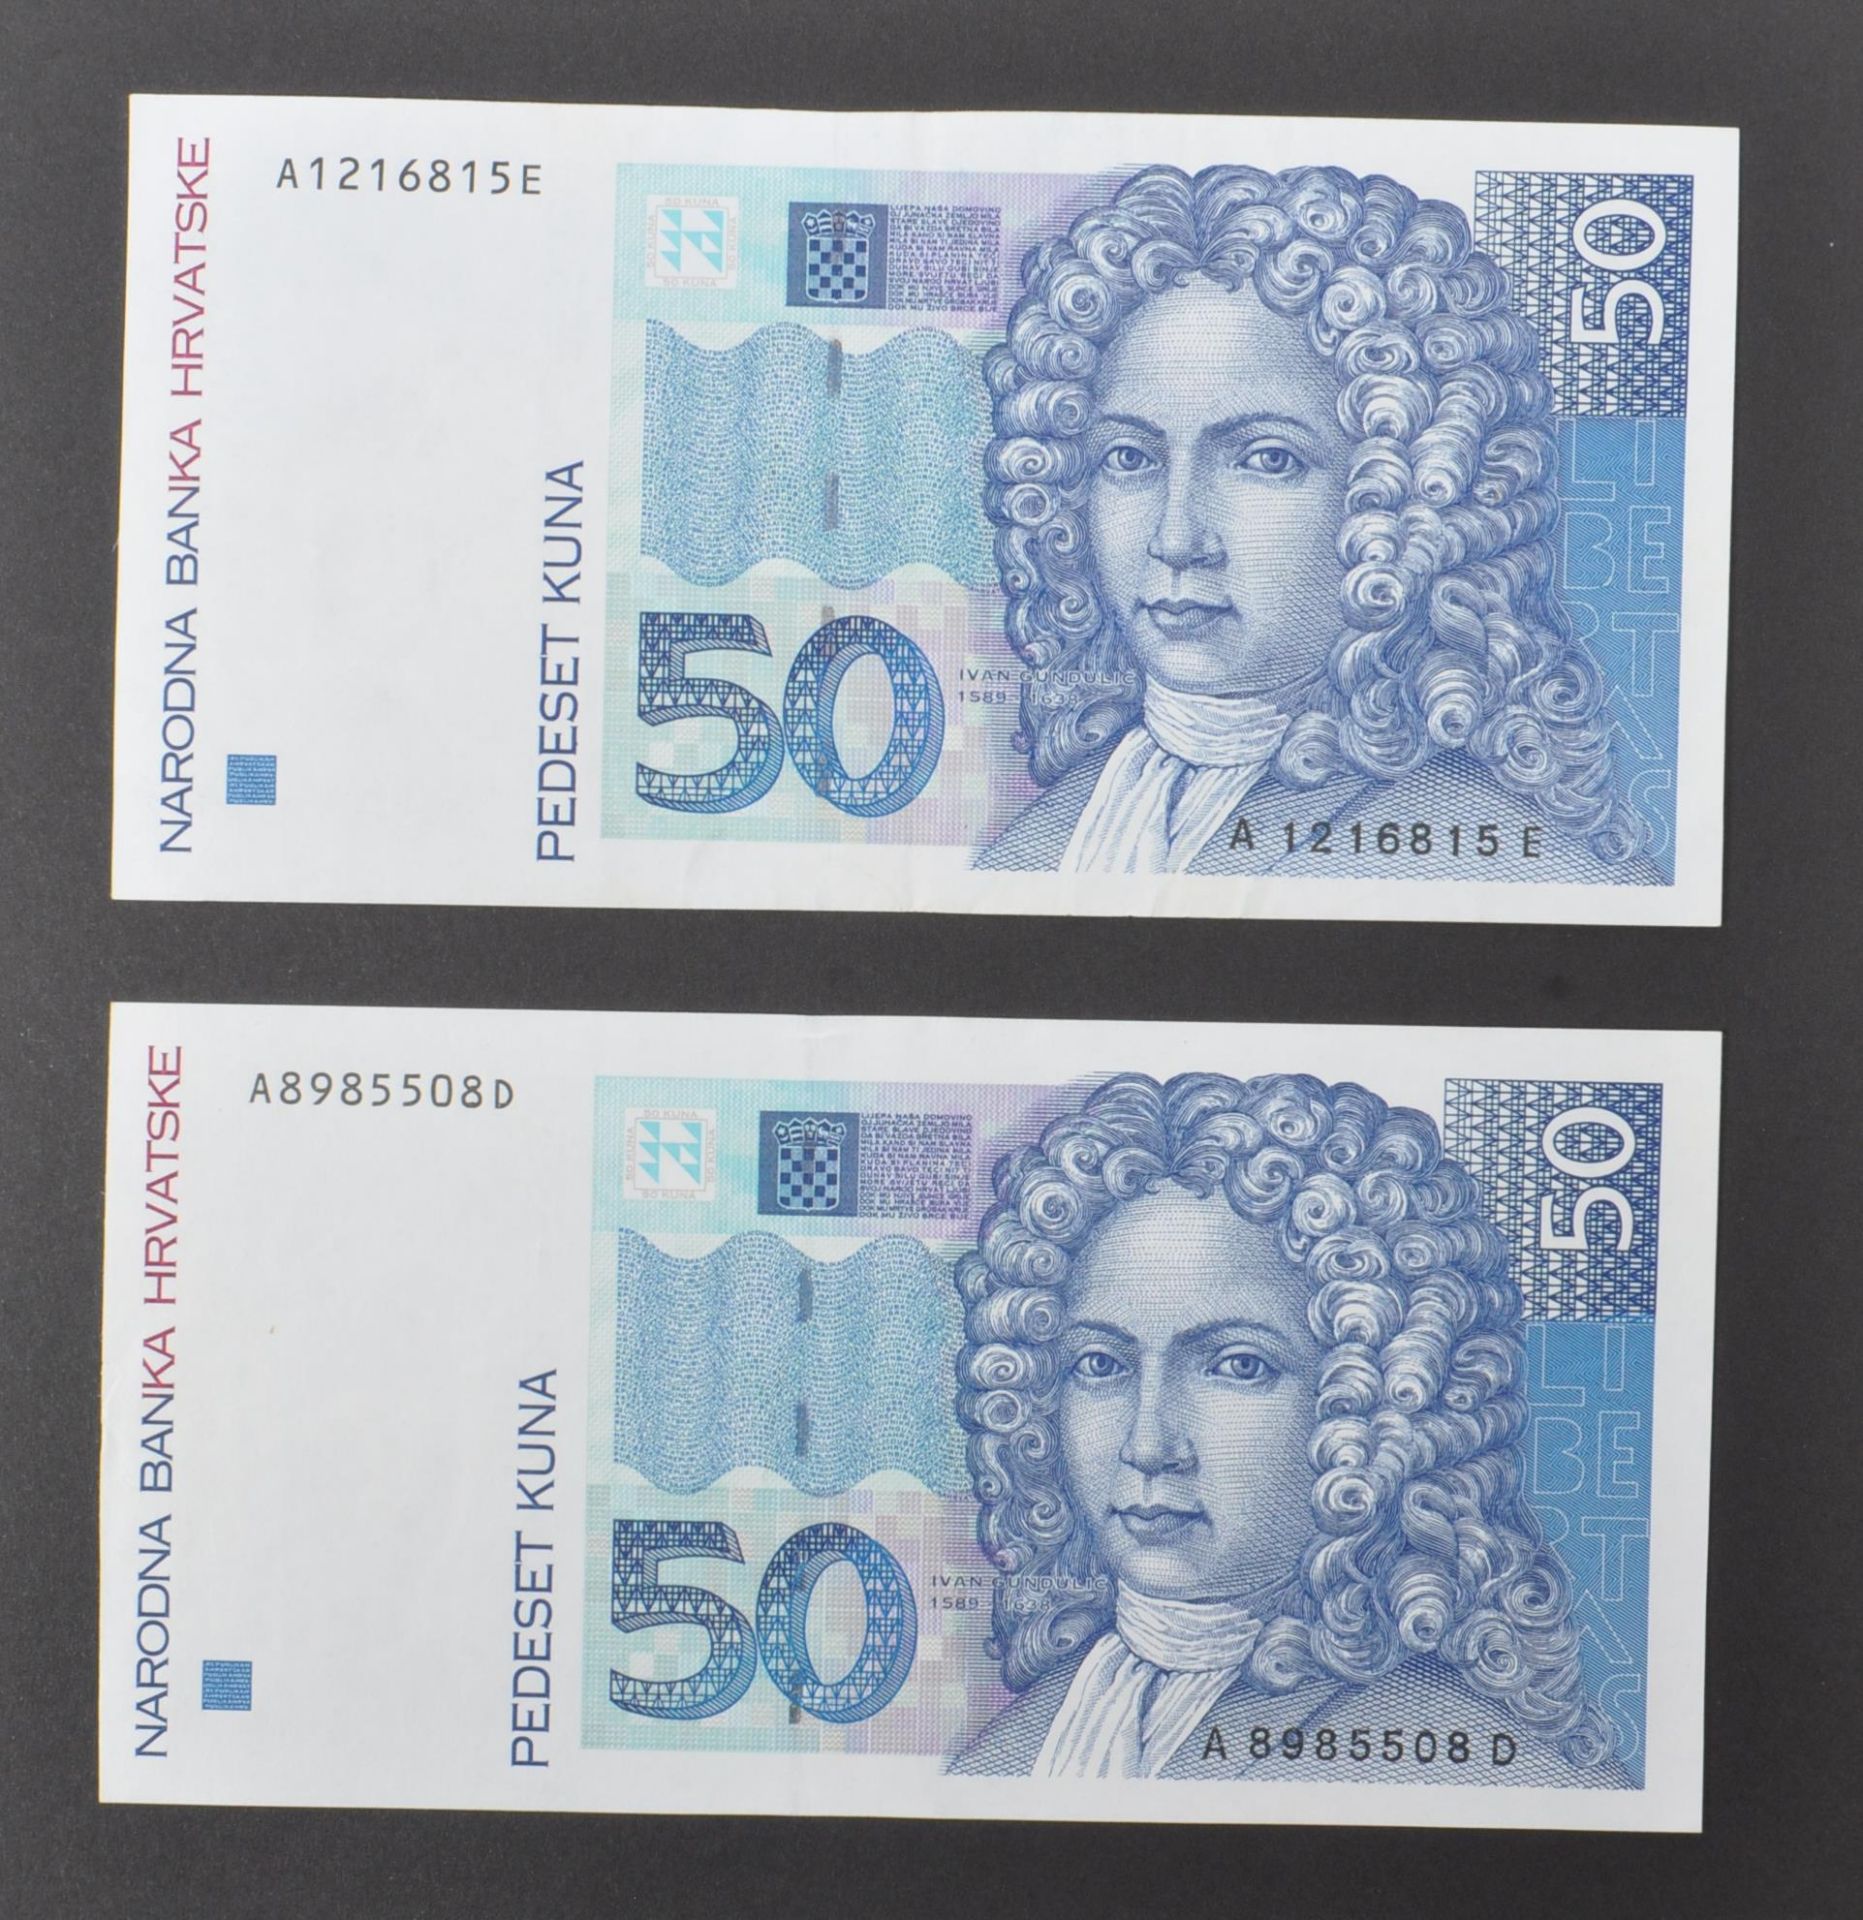 INTERNATIONAL MOSTLY UNCIRCULATED BANK NOTES - EUROPE - Image 17 of 30